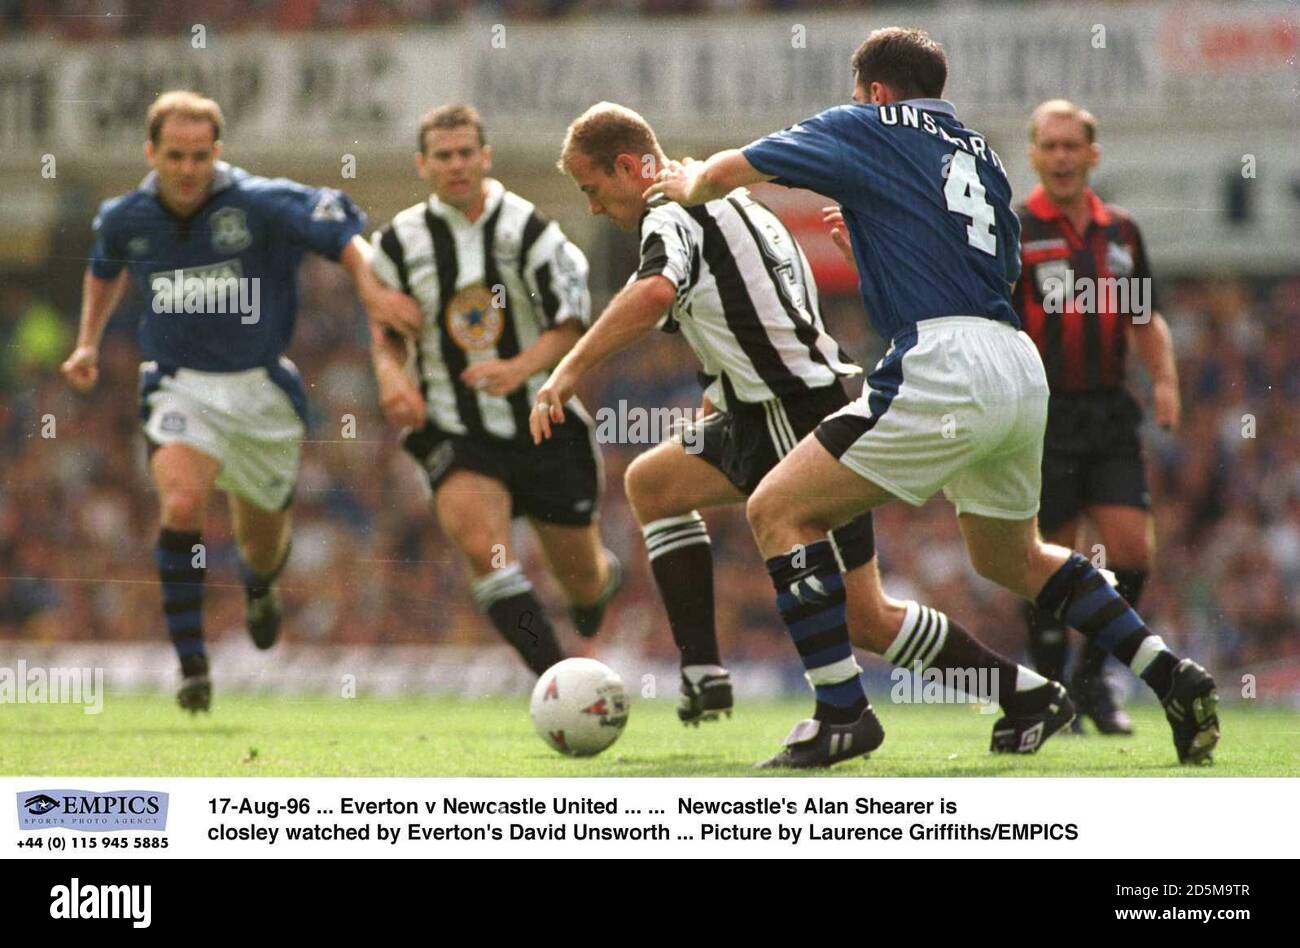 17-Aug-96 ... Everton v Newcastle United ... ...  Newcastle's Alan Shearer is closley watched by Everton's David Unsworth ... Picture by Laurence Griffiths/EMPICS Stock Photo